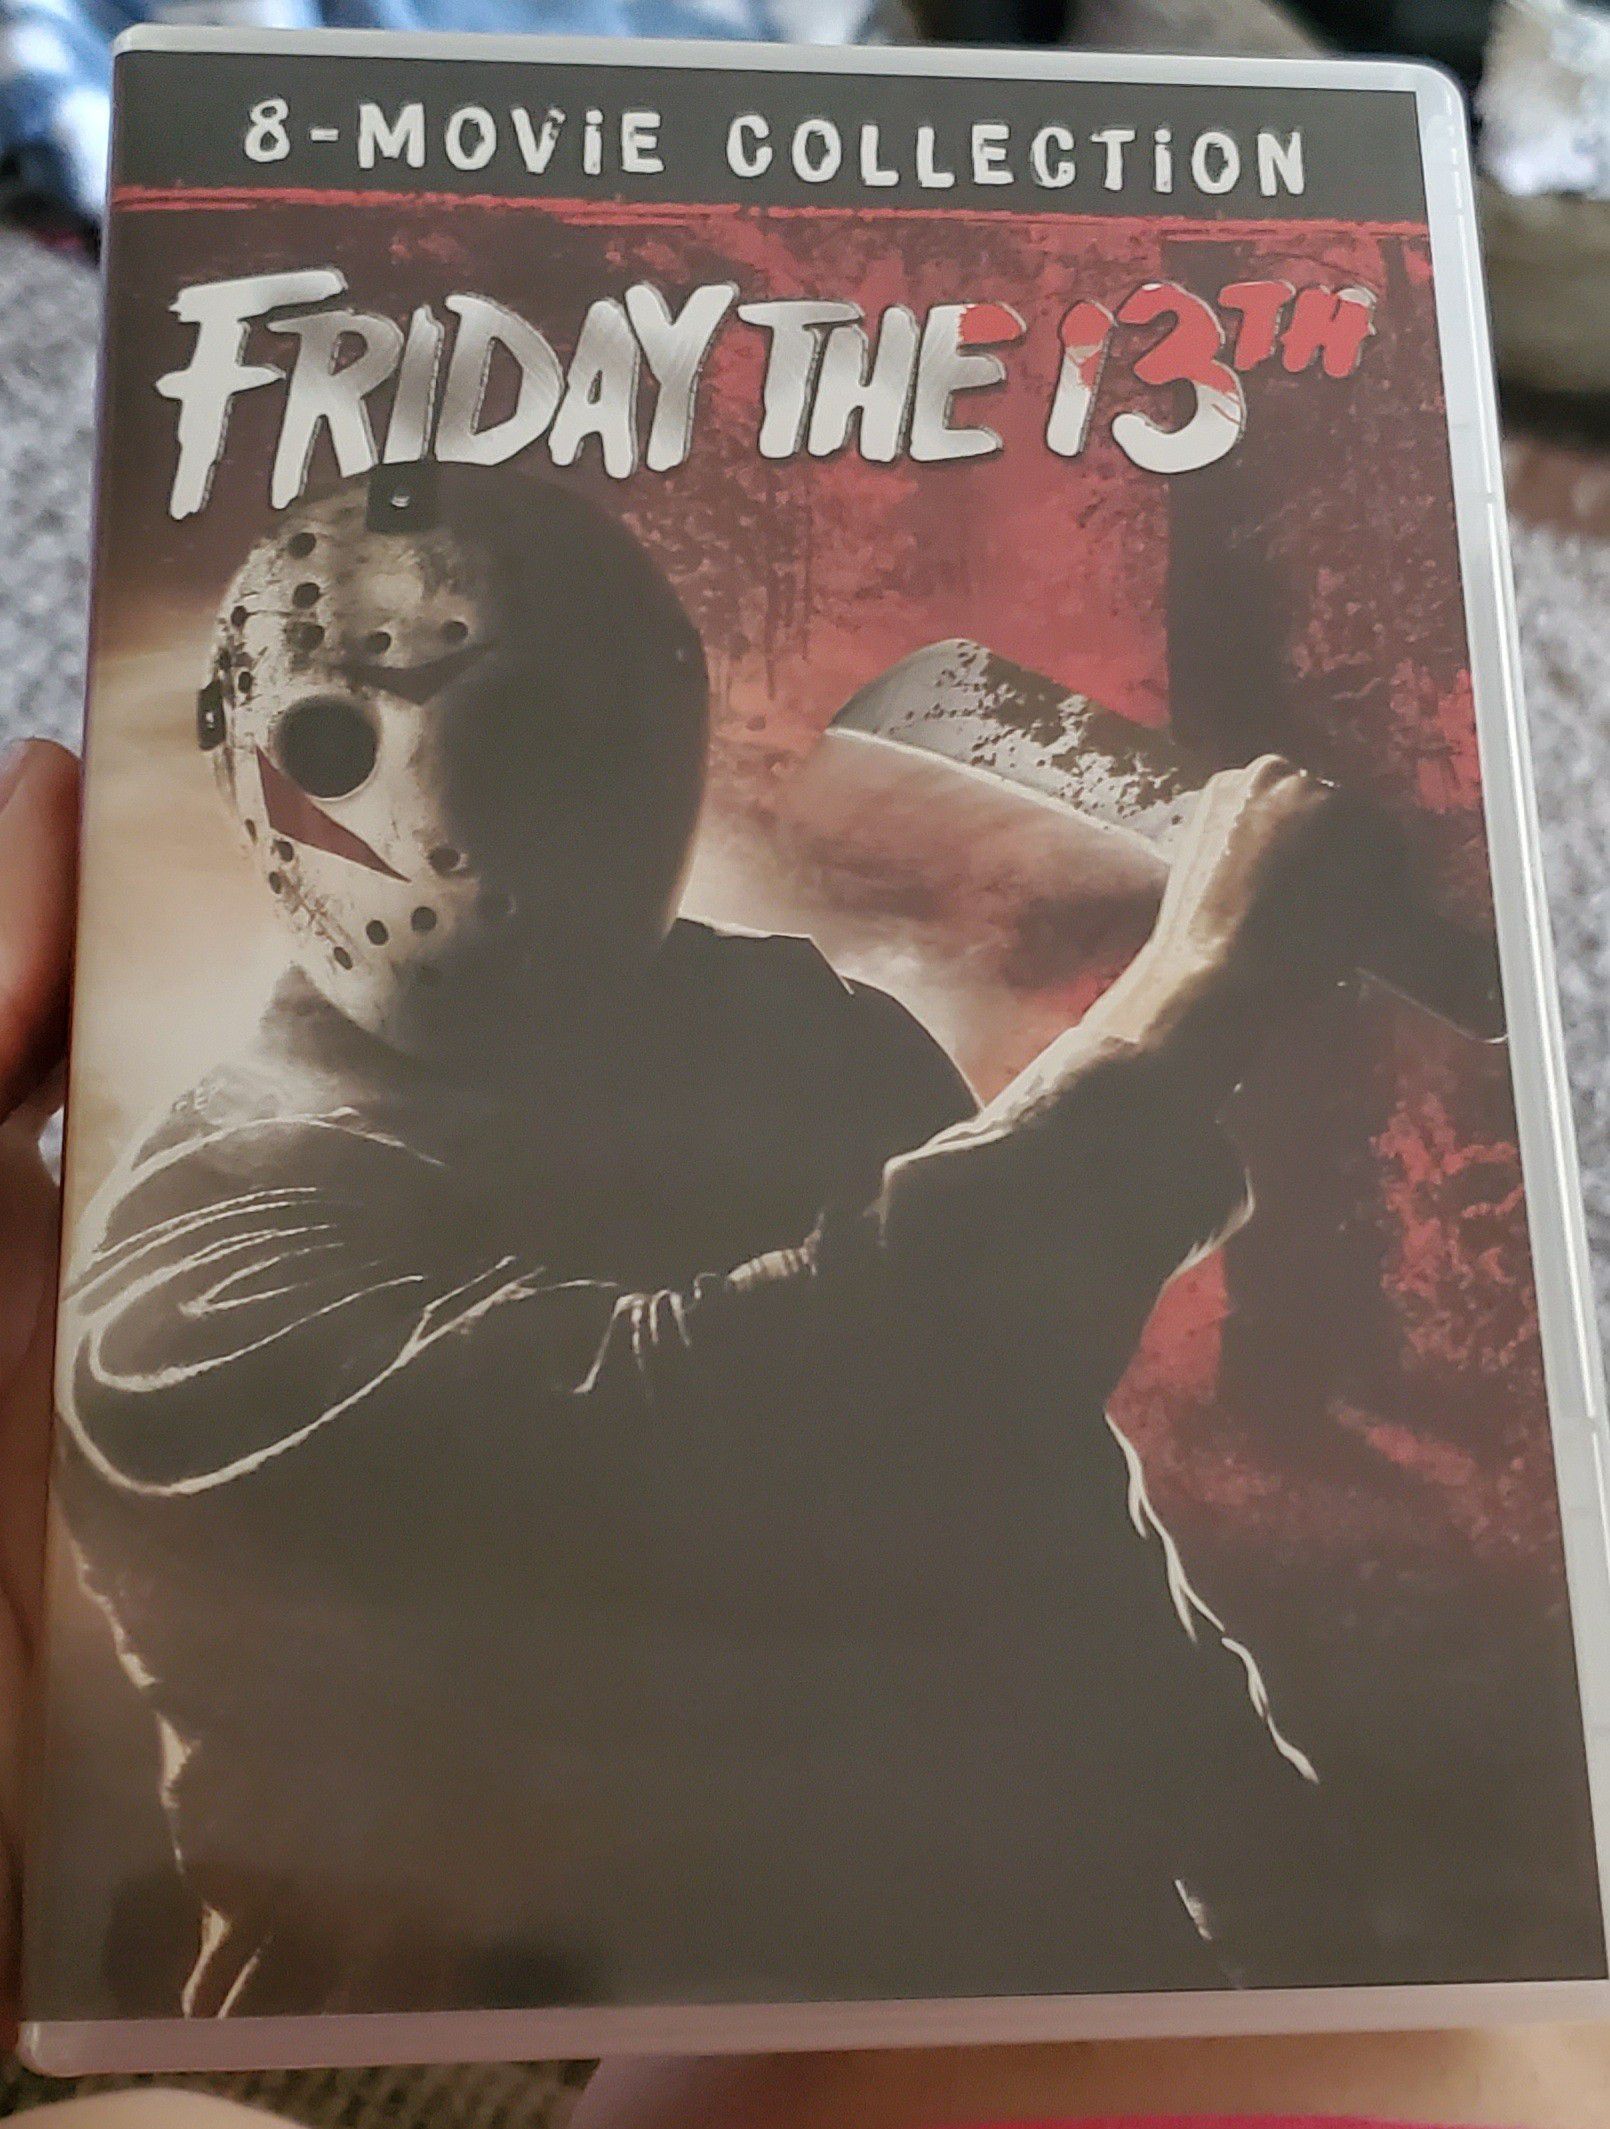 8-Friday the 13th dvds bought this set and realized I already had it